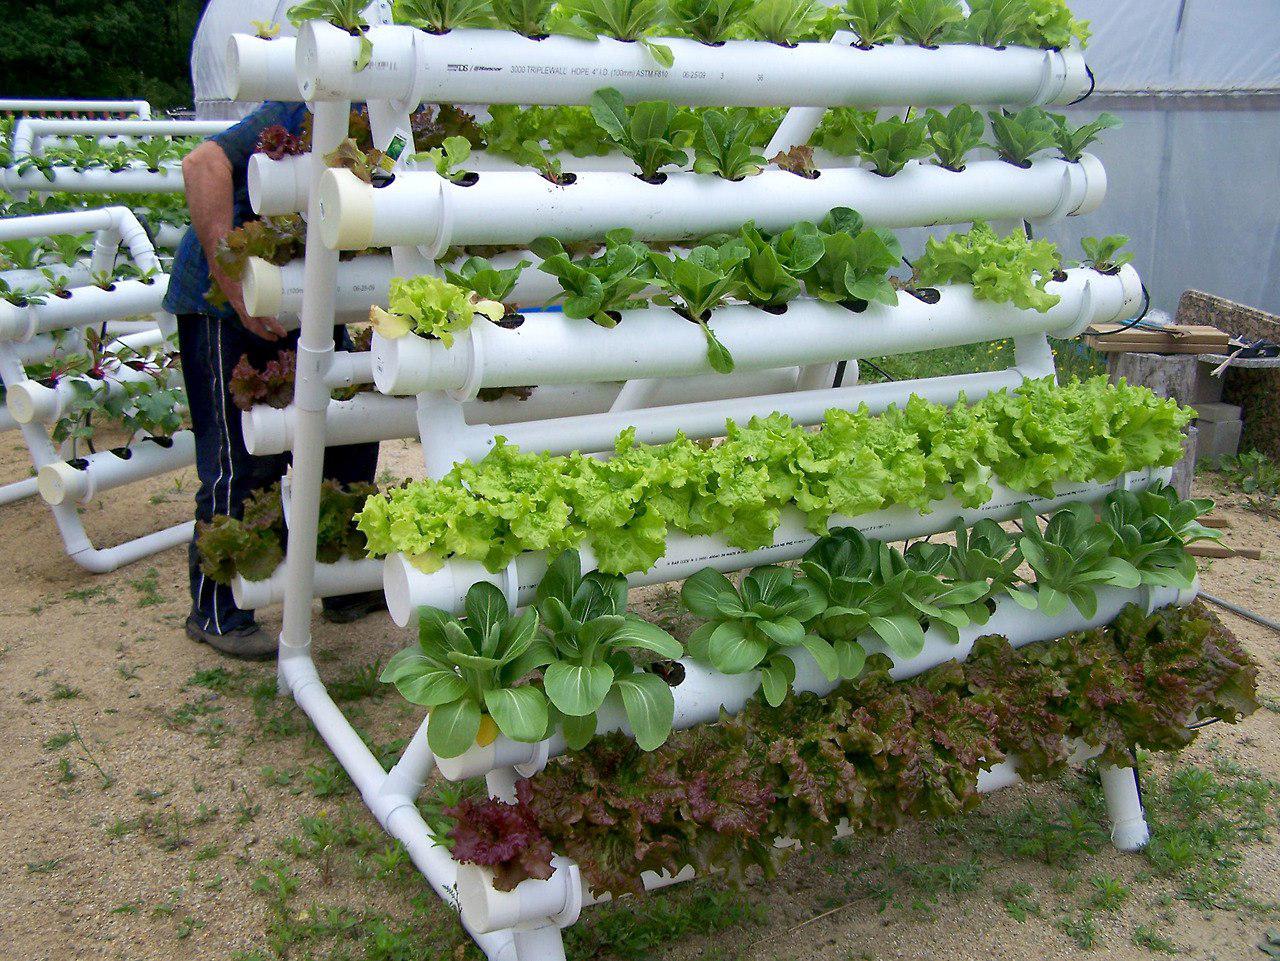 A hydroponic system with pvc pipes